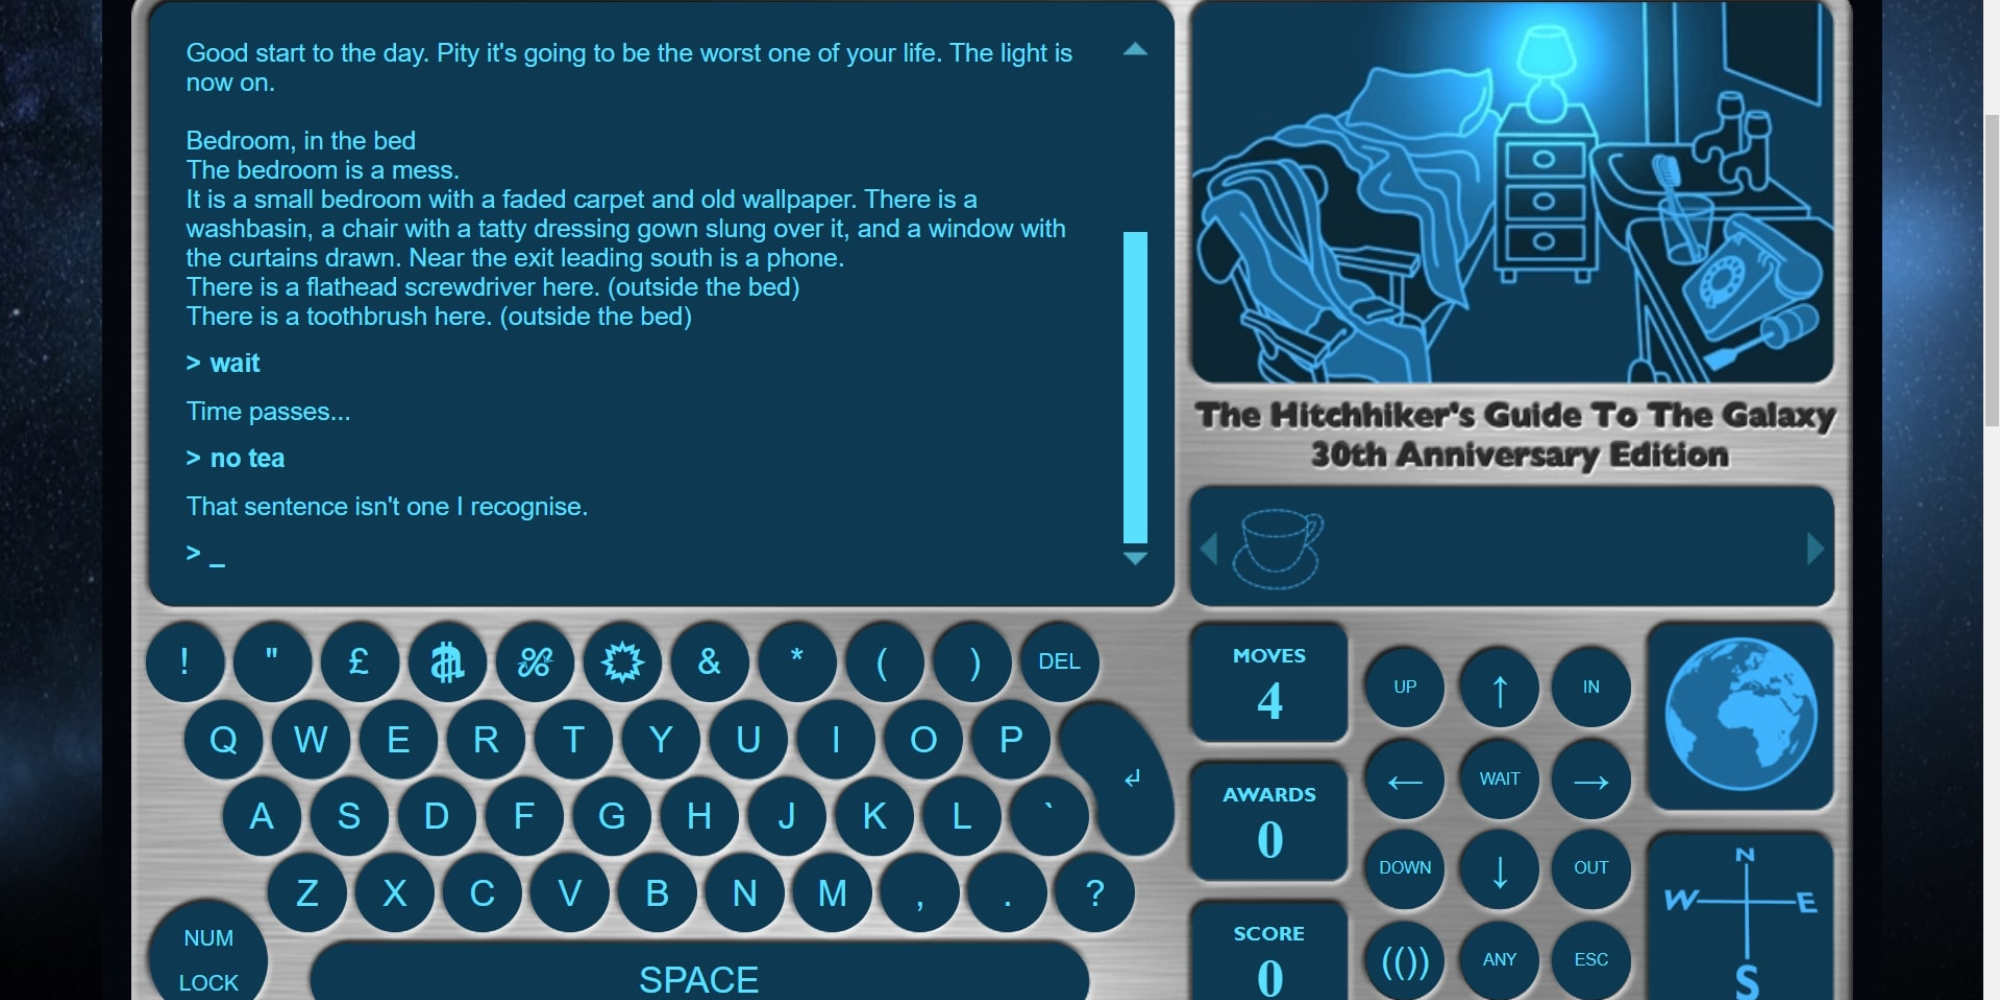 Top 10 Text Adventure Games The Hitchhiker's Guide to the Galaxy